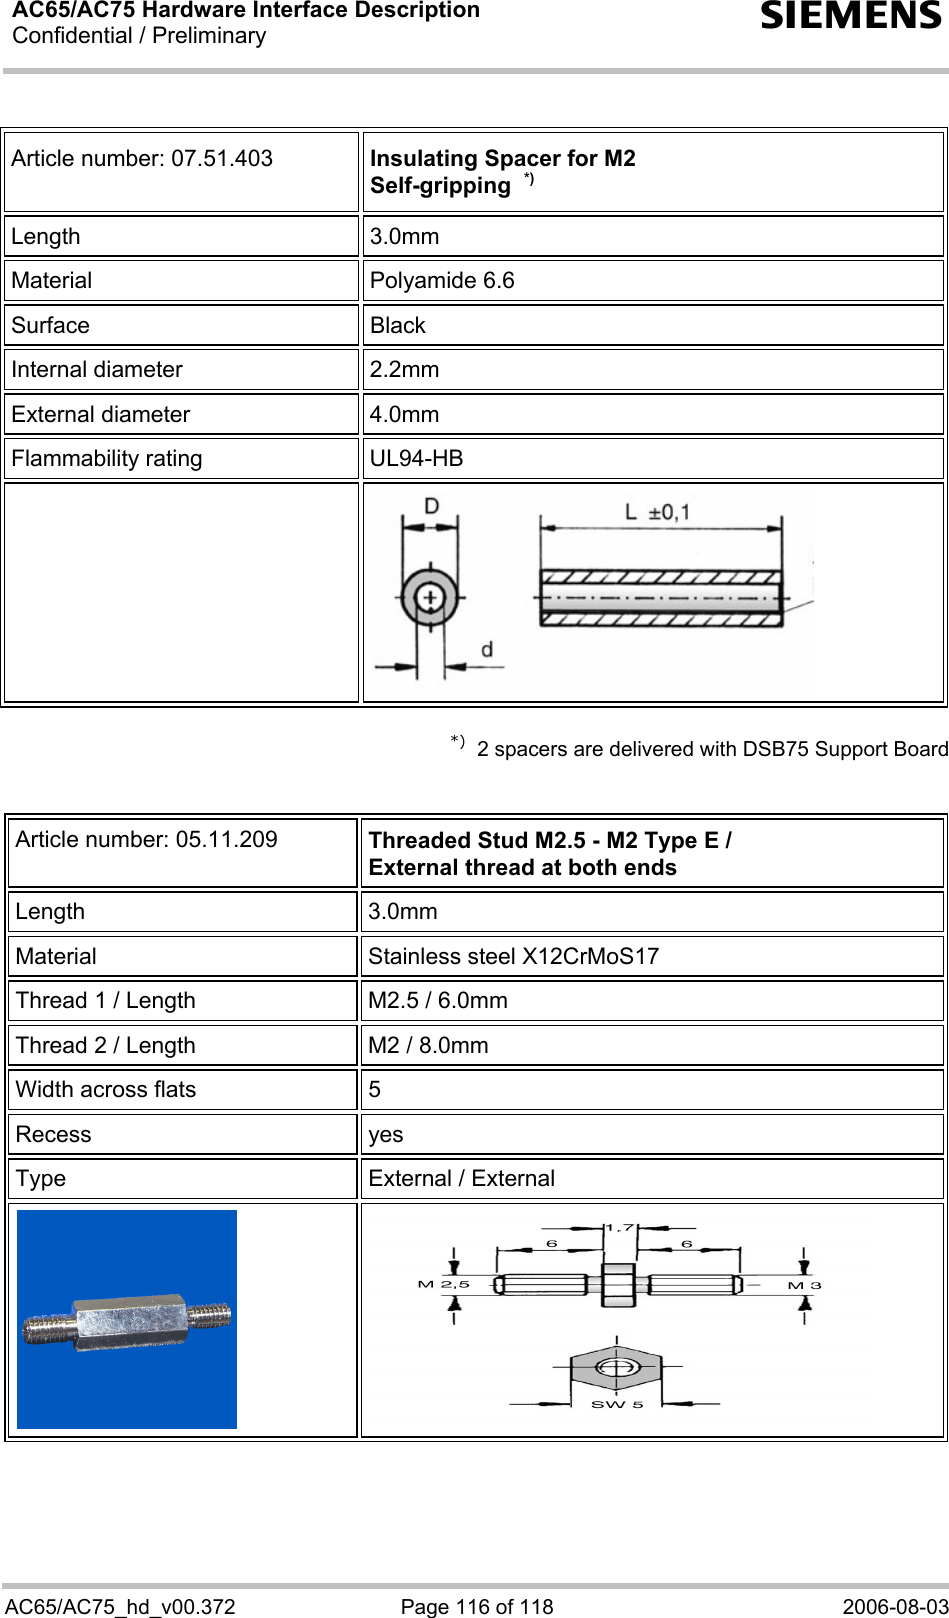 AC65/AC75 Hardware Interface Description Confidential / Preliminary  s AC65/AC75_hd_v00.372  Page 116 of 118  2006-08-03  Article number: 07.51.403  Insulating Spacer for M2 Self-gripping  *) Length 3.0mm Material Polyamide 6.6 Surface Black Internal diameter  2.2mm External diameter  4.0mm Flammability rating  UL94-HB    *)  2 spacers are delivered with DSB75 Support Board   Article number: 05.11.209   Threaded Stud M2.5 - M2 Type E / External thread at both ends Length 3.0mm Material  Stainless steel X12CrMoS17 Thread 1 / Length  M2.5 / 6.0mm Thread 2 / Length  M2 / 8.0mm Width across flats  5  Recess yes Type  External / External     